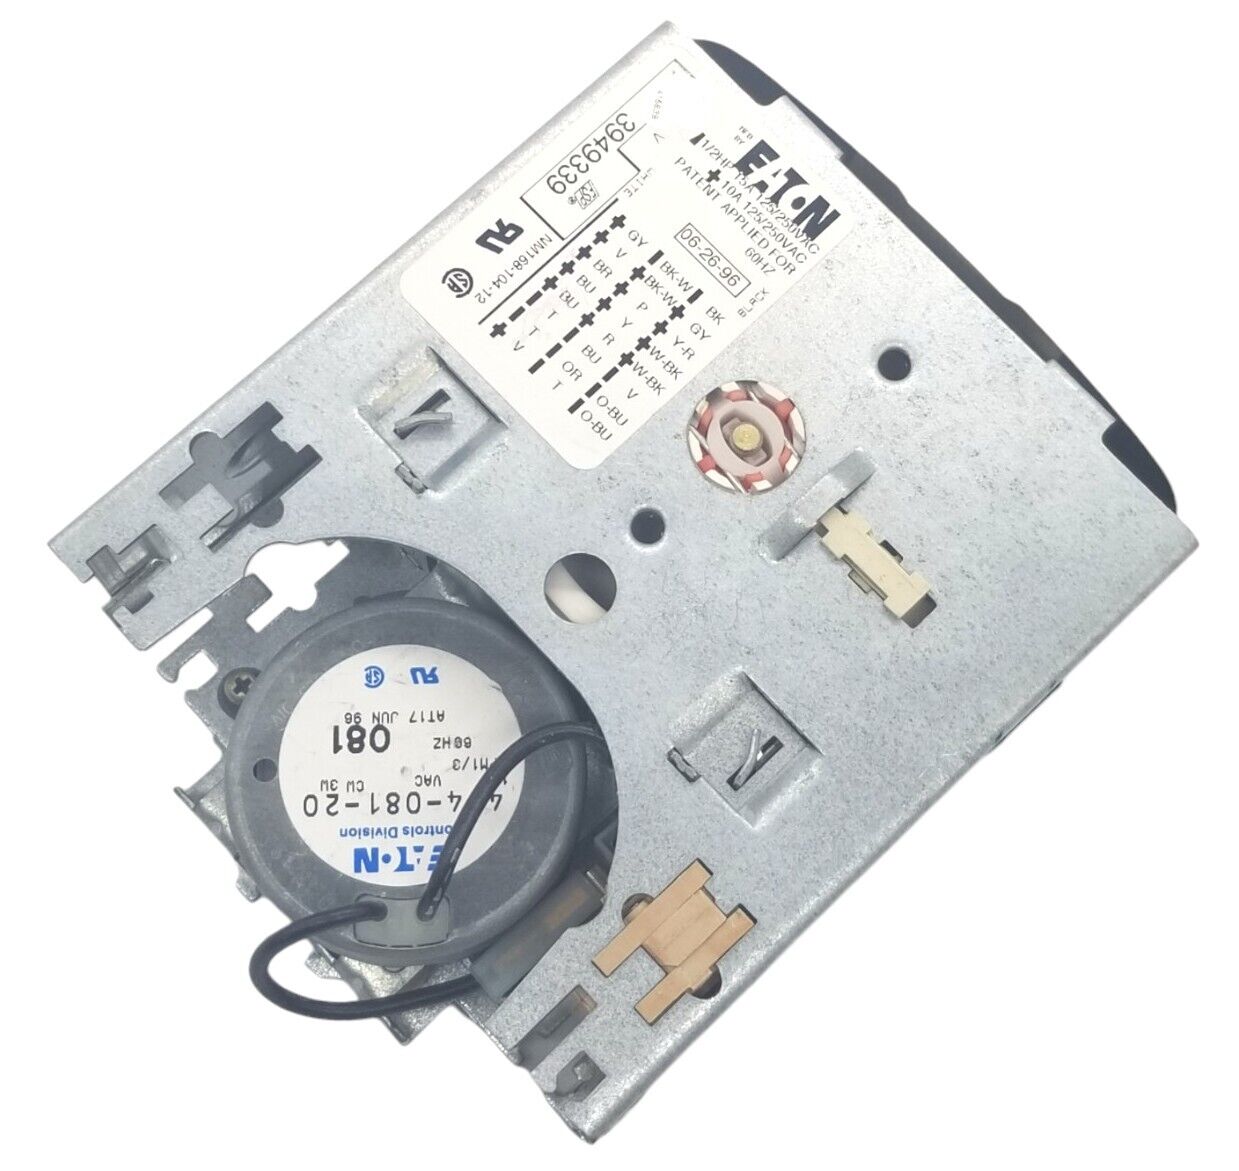 OEM Replacement for Whirlpool Washer Timer 3949339